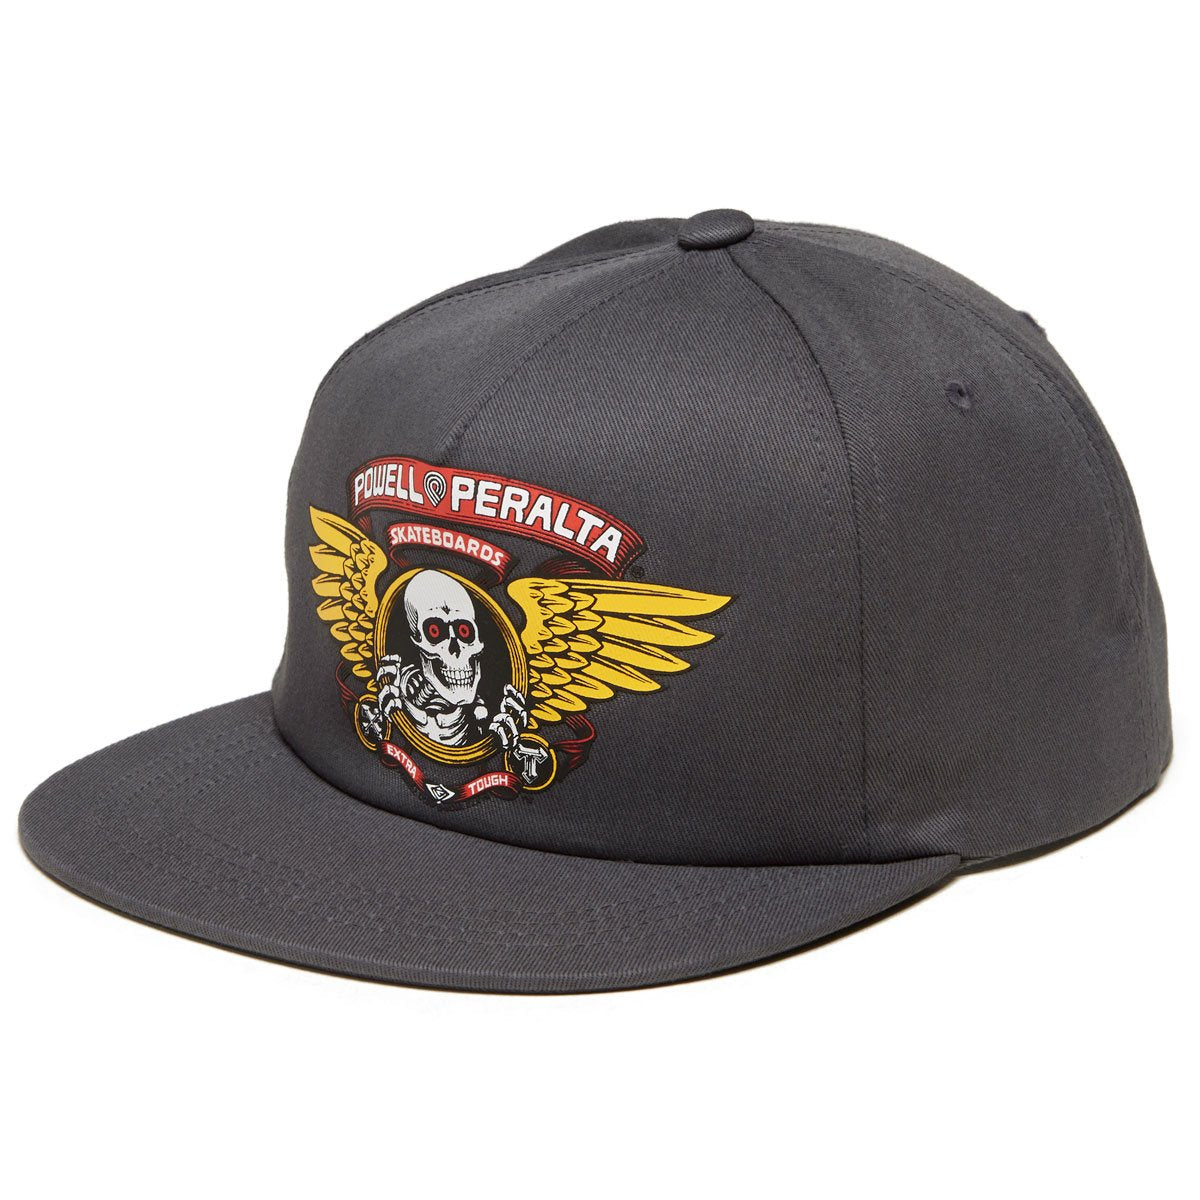 Powell-Peralta Winged Ripper Snapback Hat - Charcoal image 1